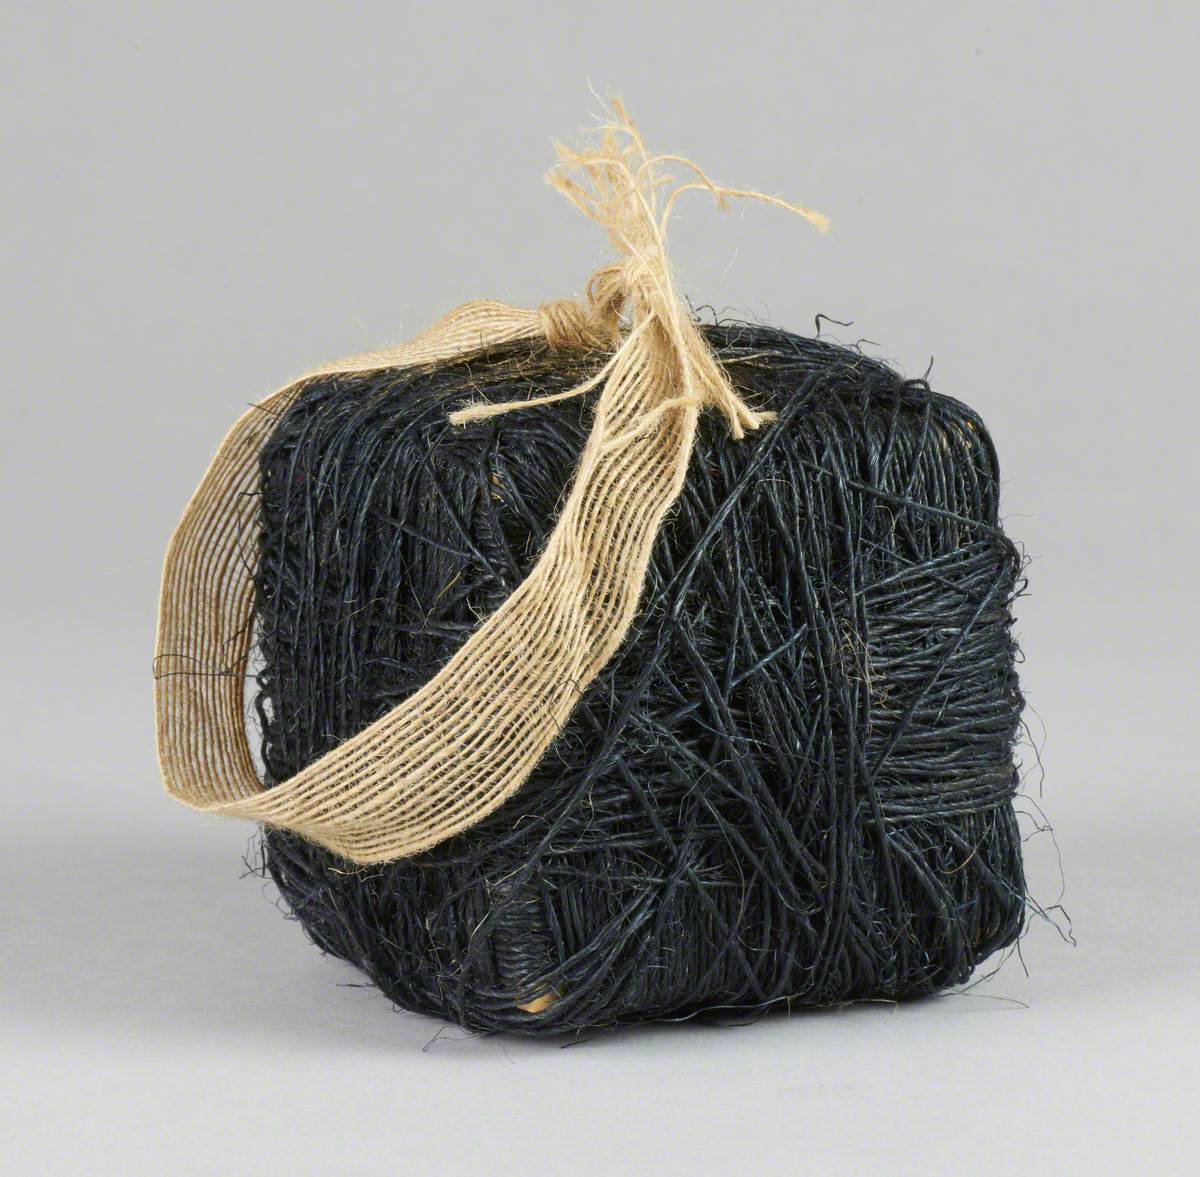 121 Linked Cubes: Cube Covered in Black Jute Twine